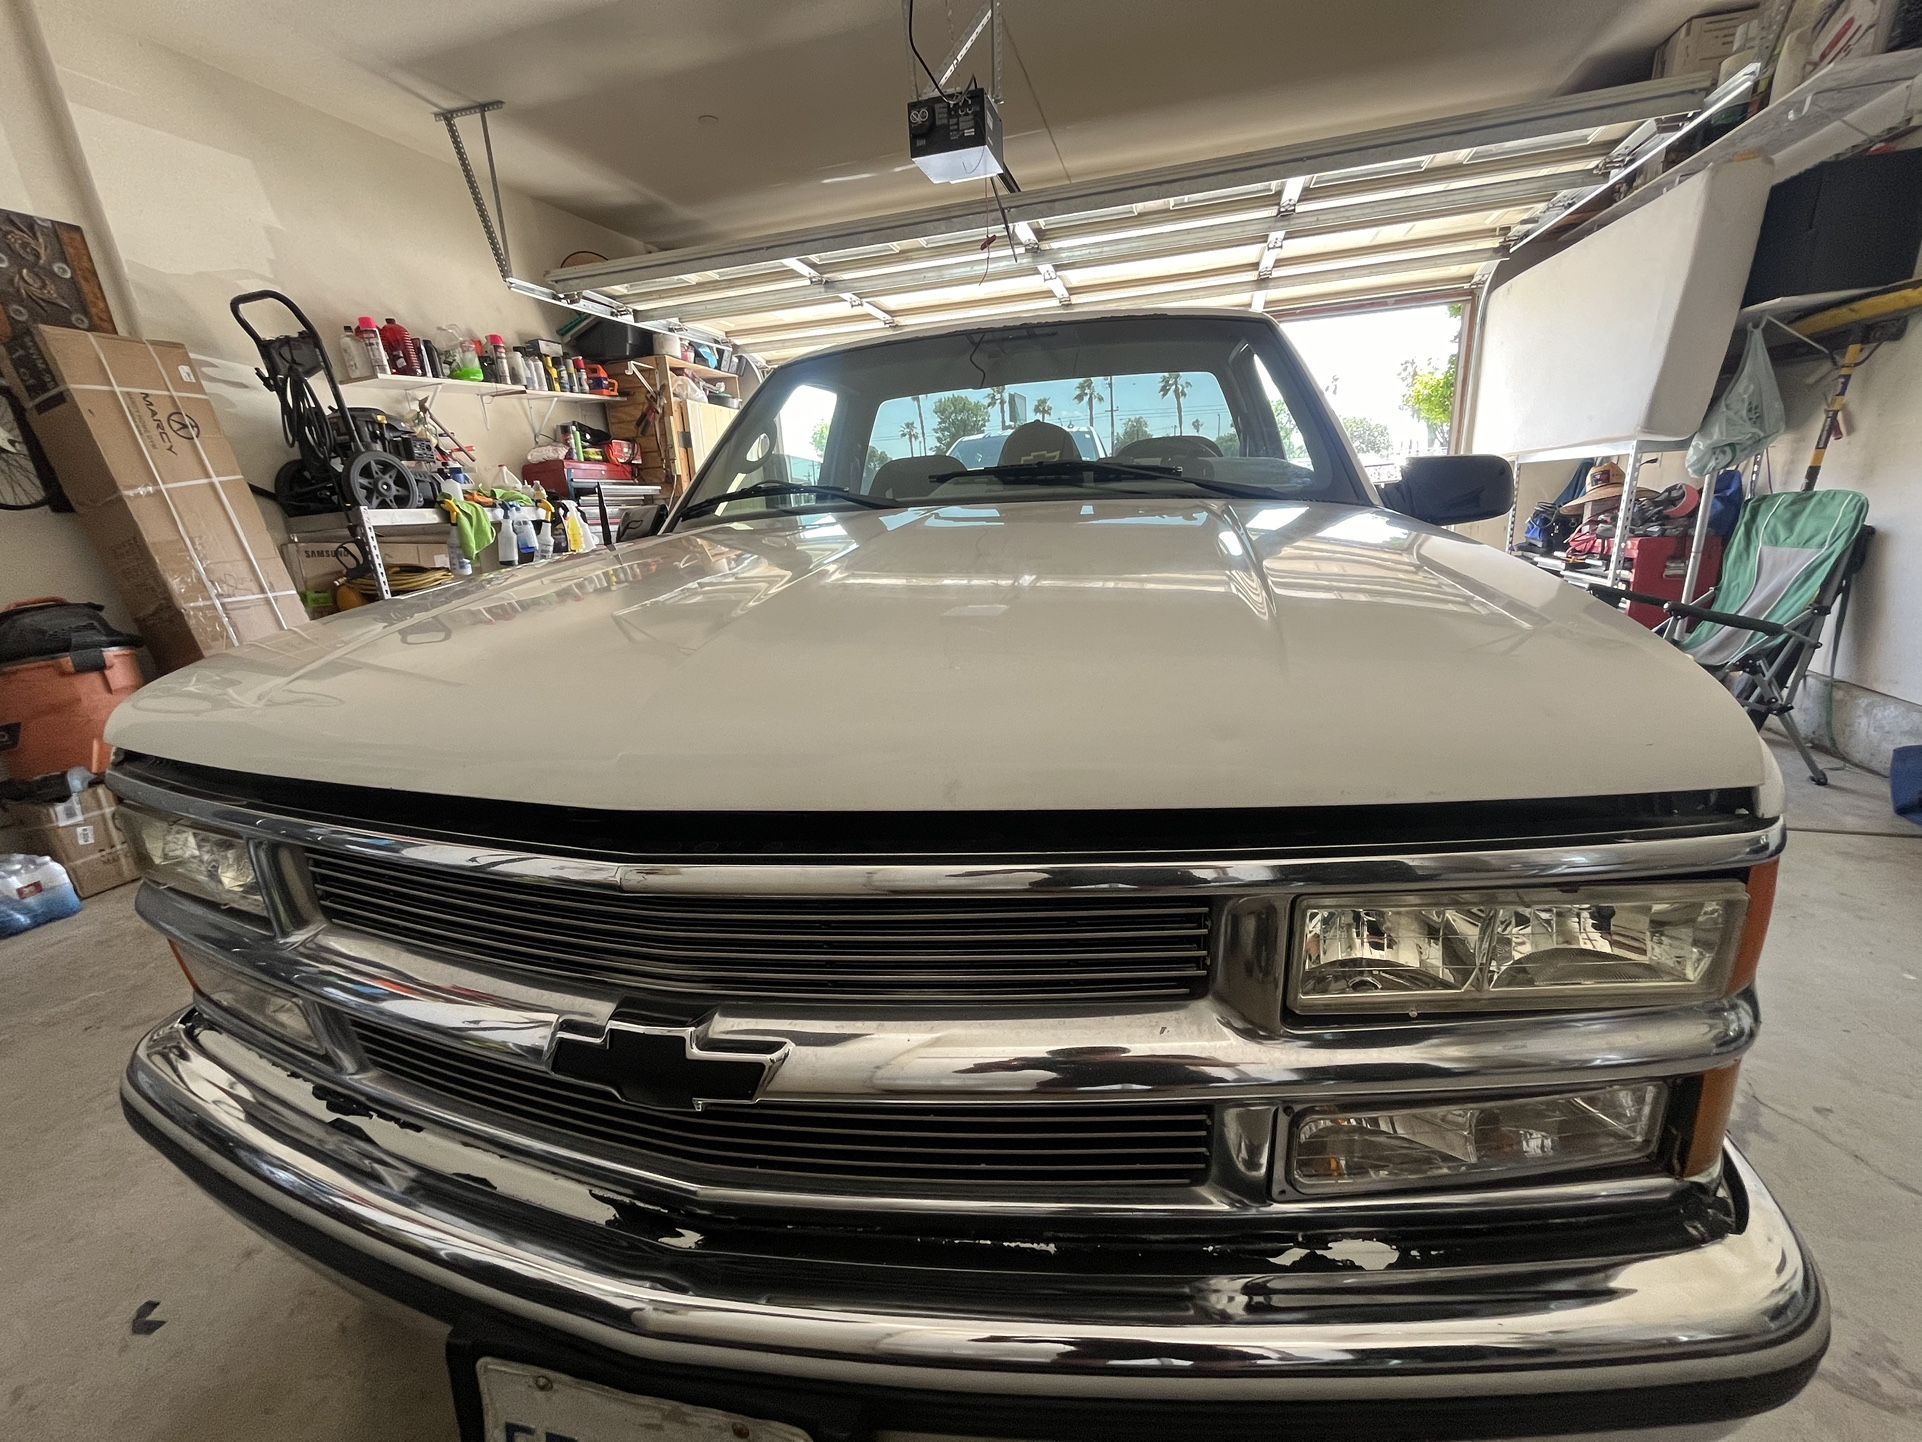 OBS HEADLIGHTS AND GRILL